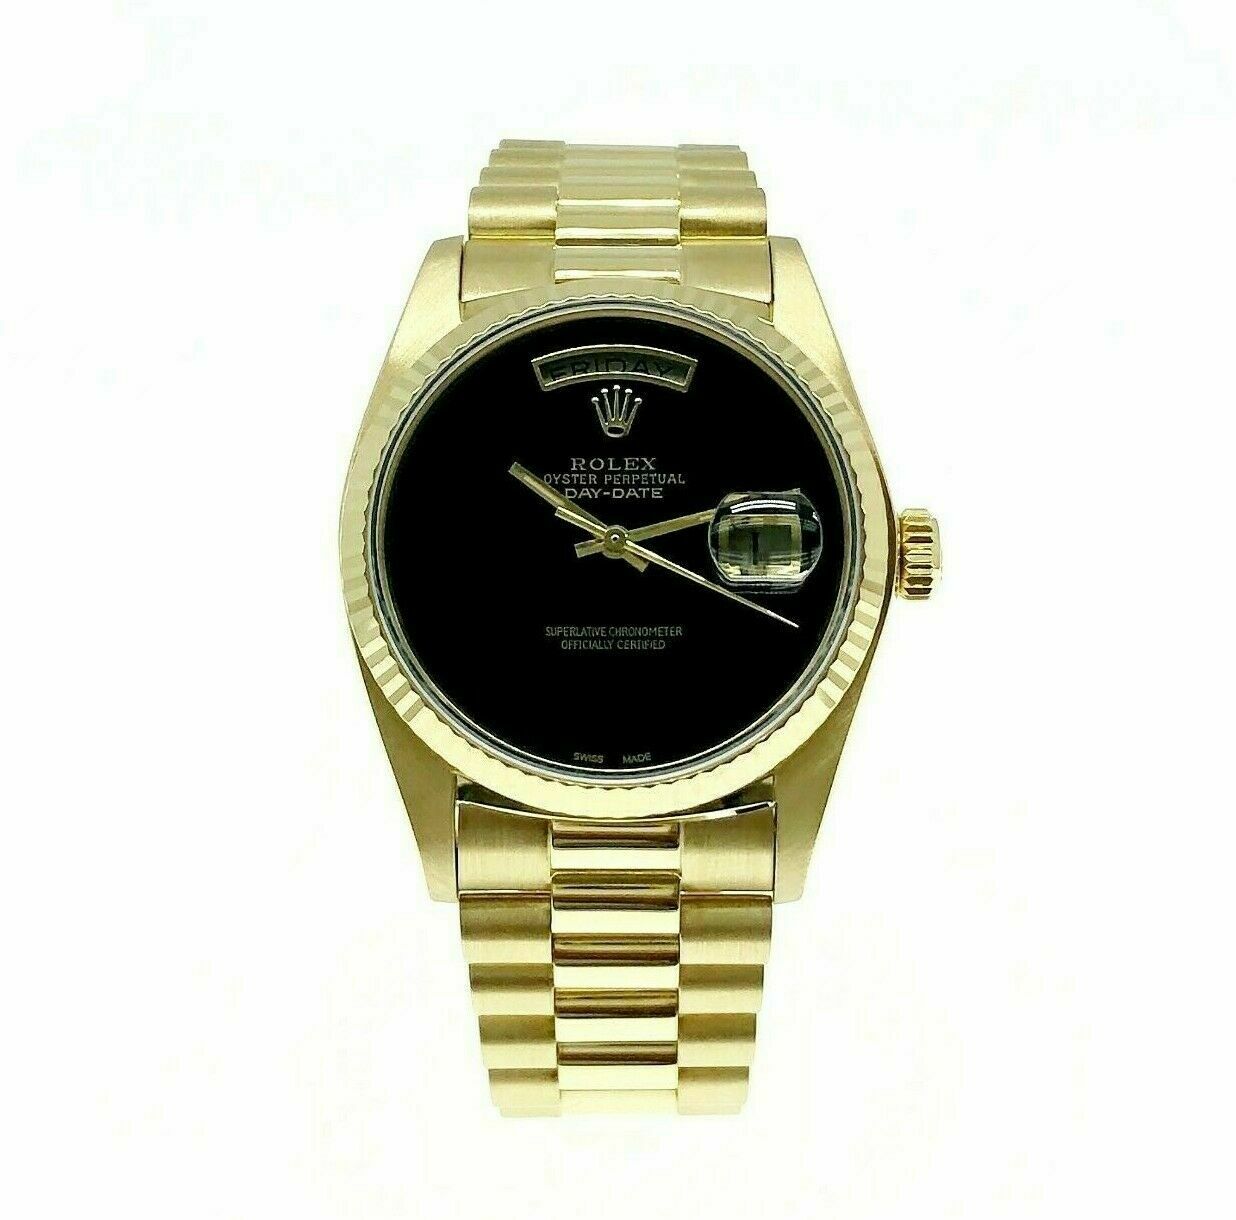 Rolex Day Date 18K President 36mm Watch 18038 with Onyx Dial –